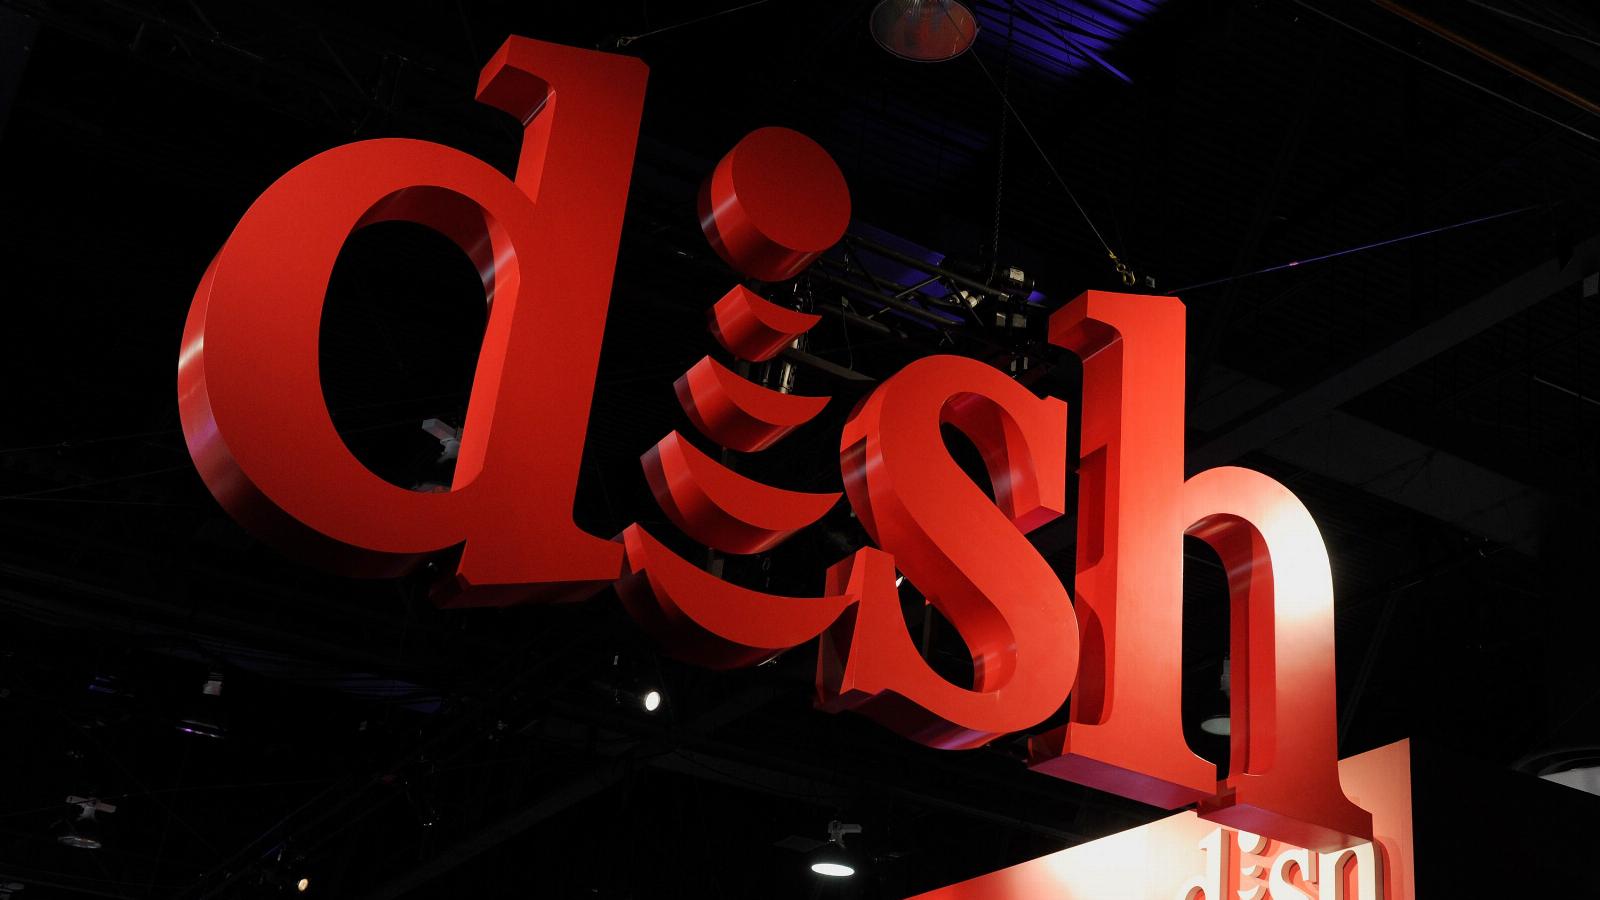 Dish hit by multiday outage after reported cyberattack